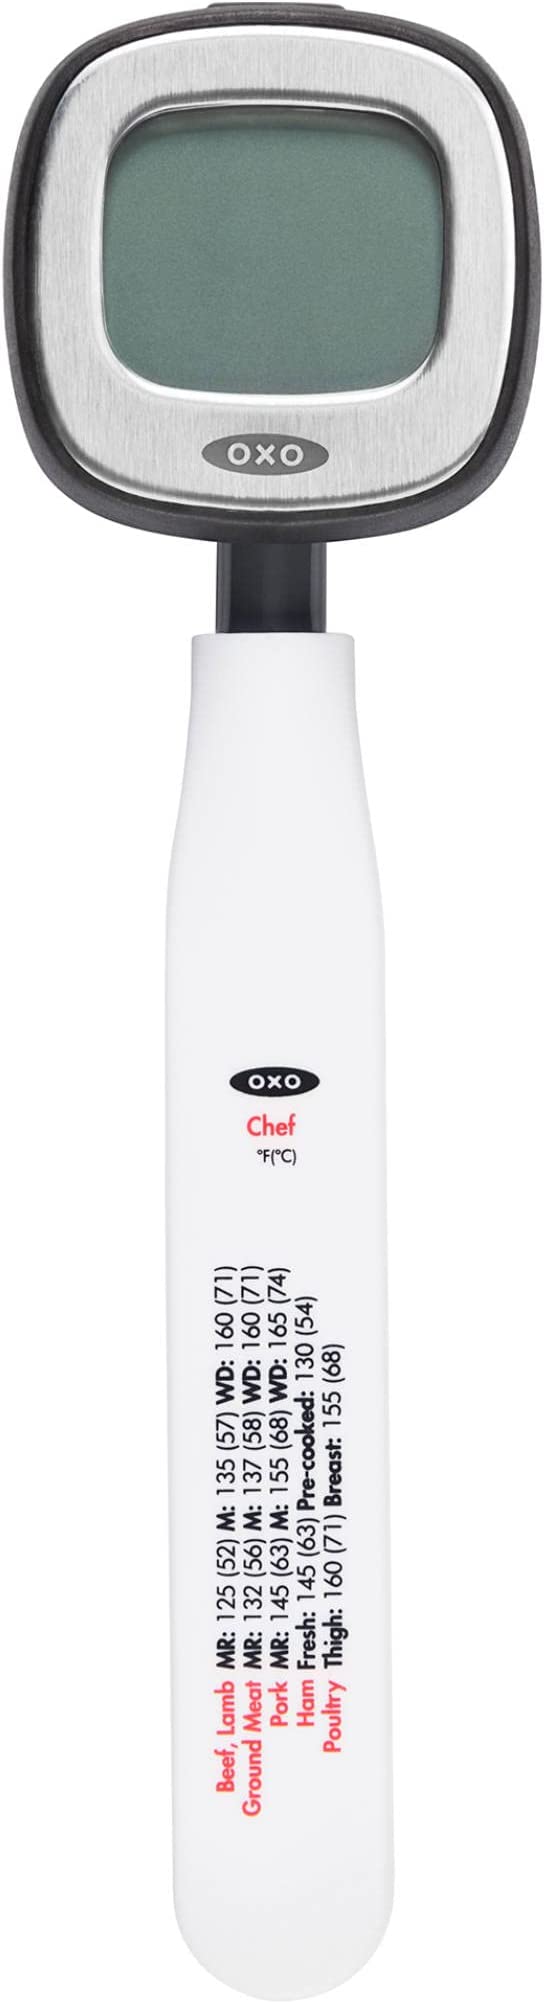 Chef's Digital Thermometer